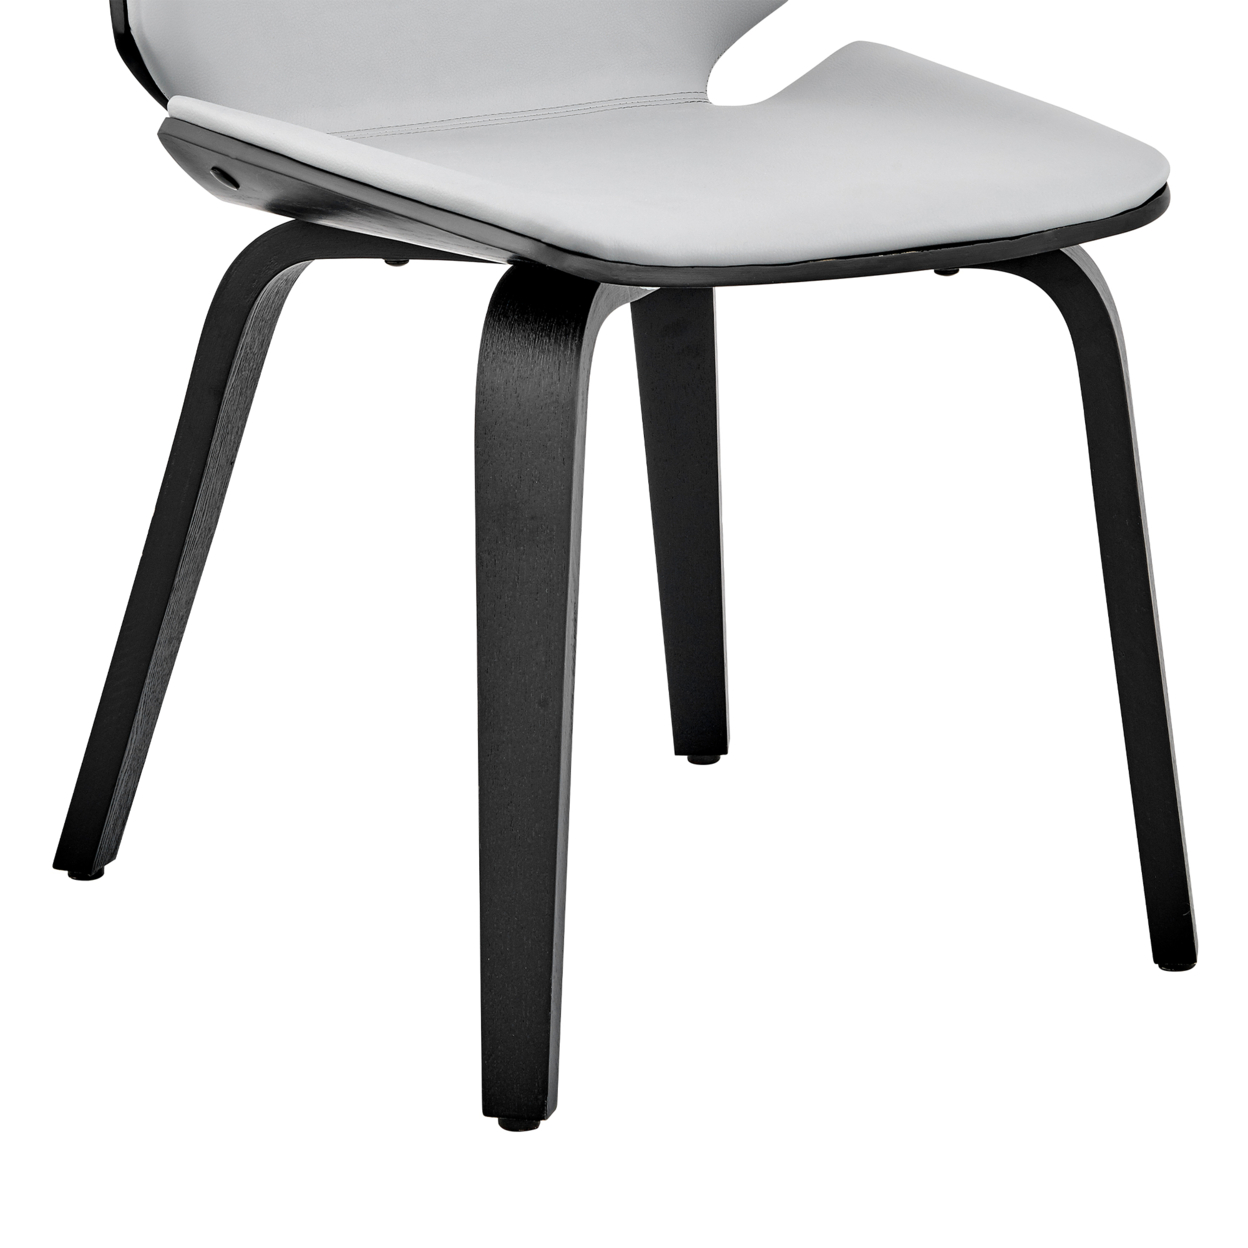 Leatherette Dining Chair With Slightly Curved Seat, Gray And Black- Saltoro Sherpi